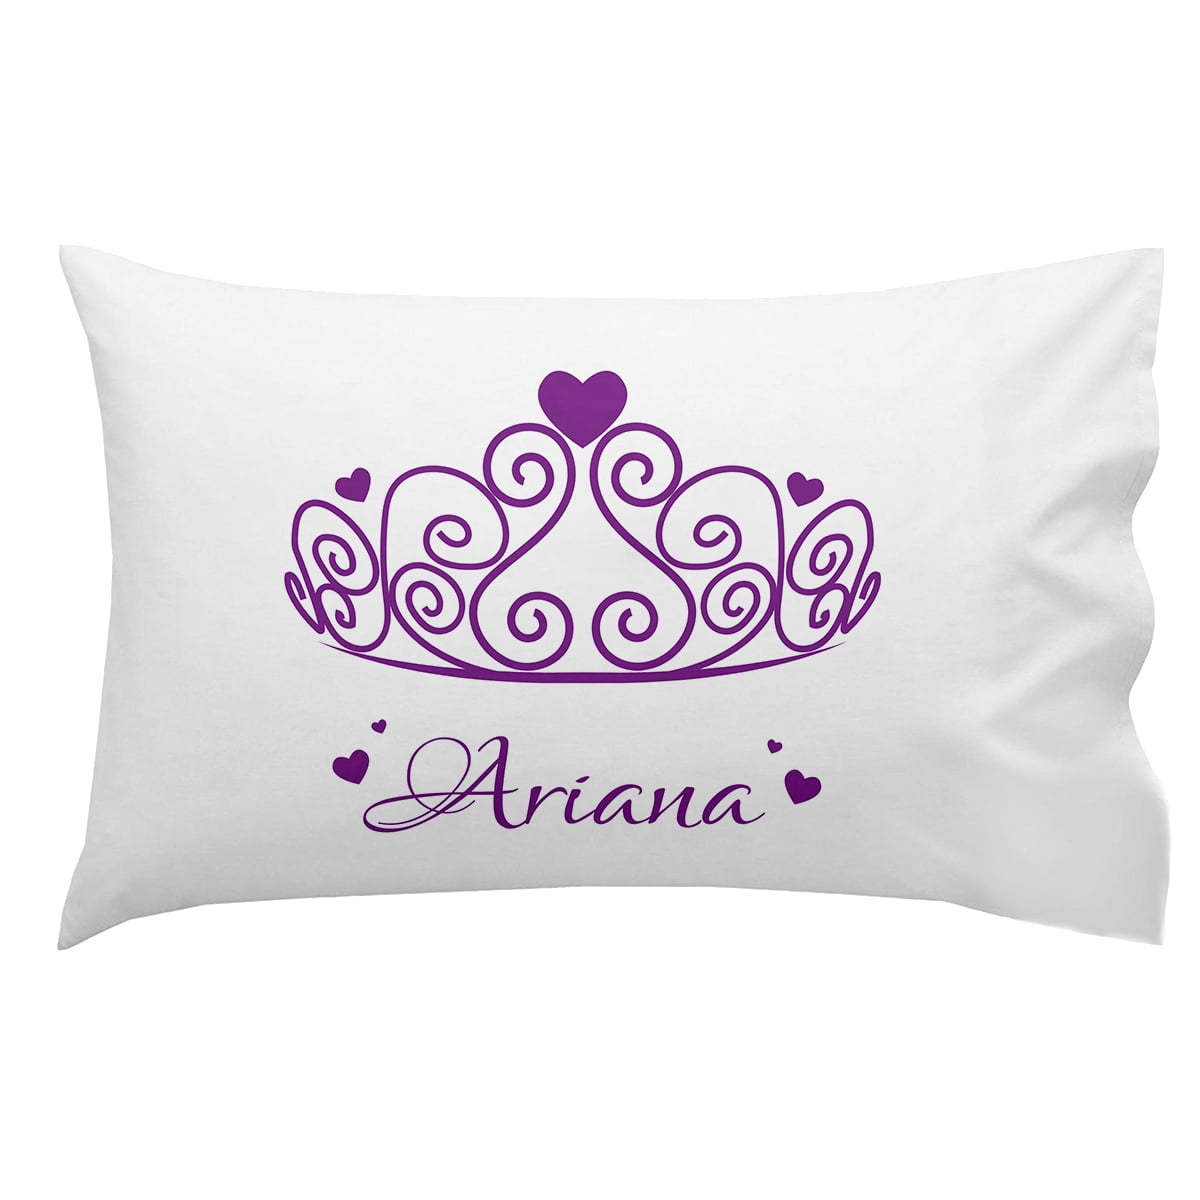 Personalized Embroidered Hot Pink Princess Silver Crown Hand Towel 100% Cotton 